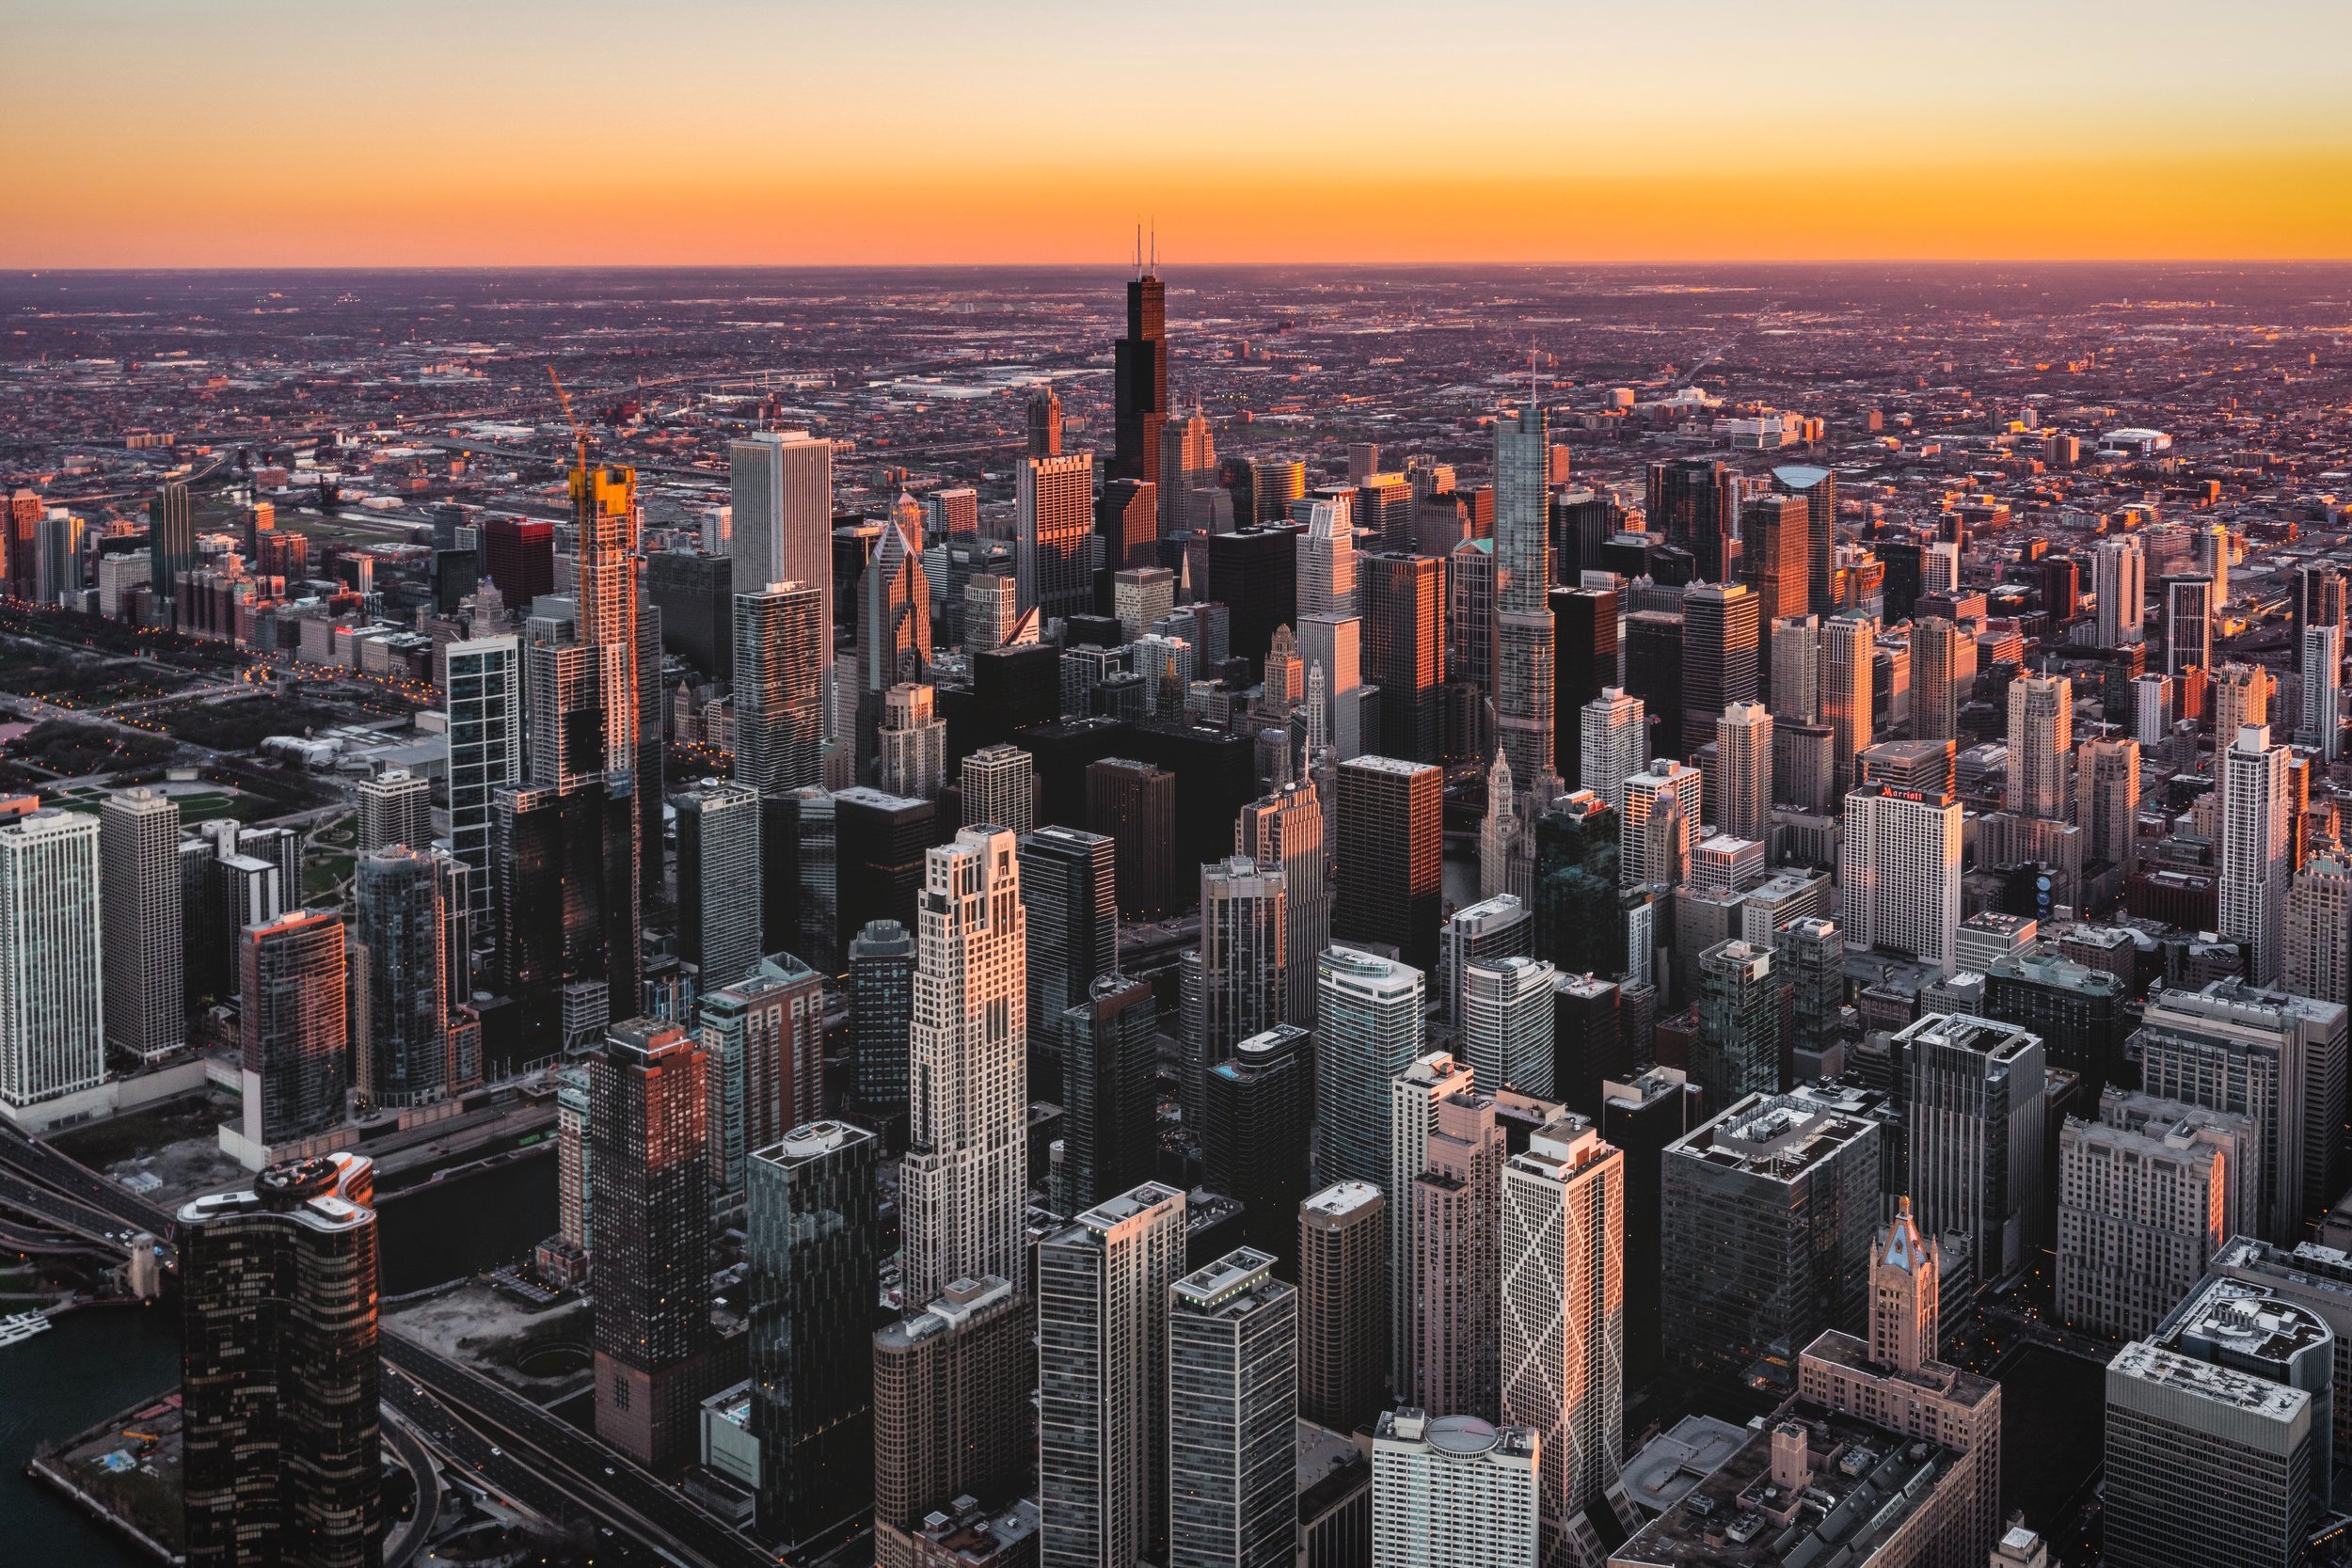 City scape of Chicago with the sun setting in the background.